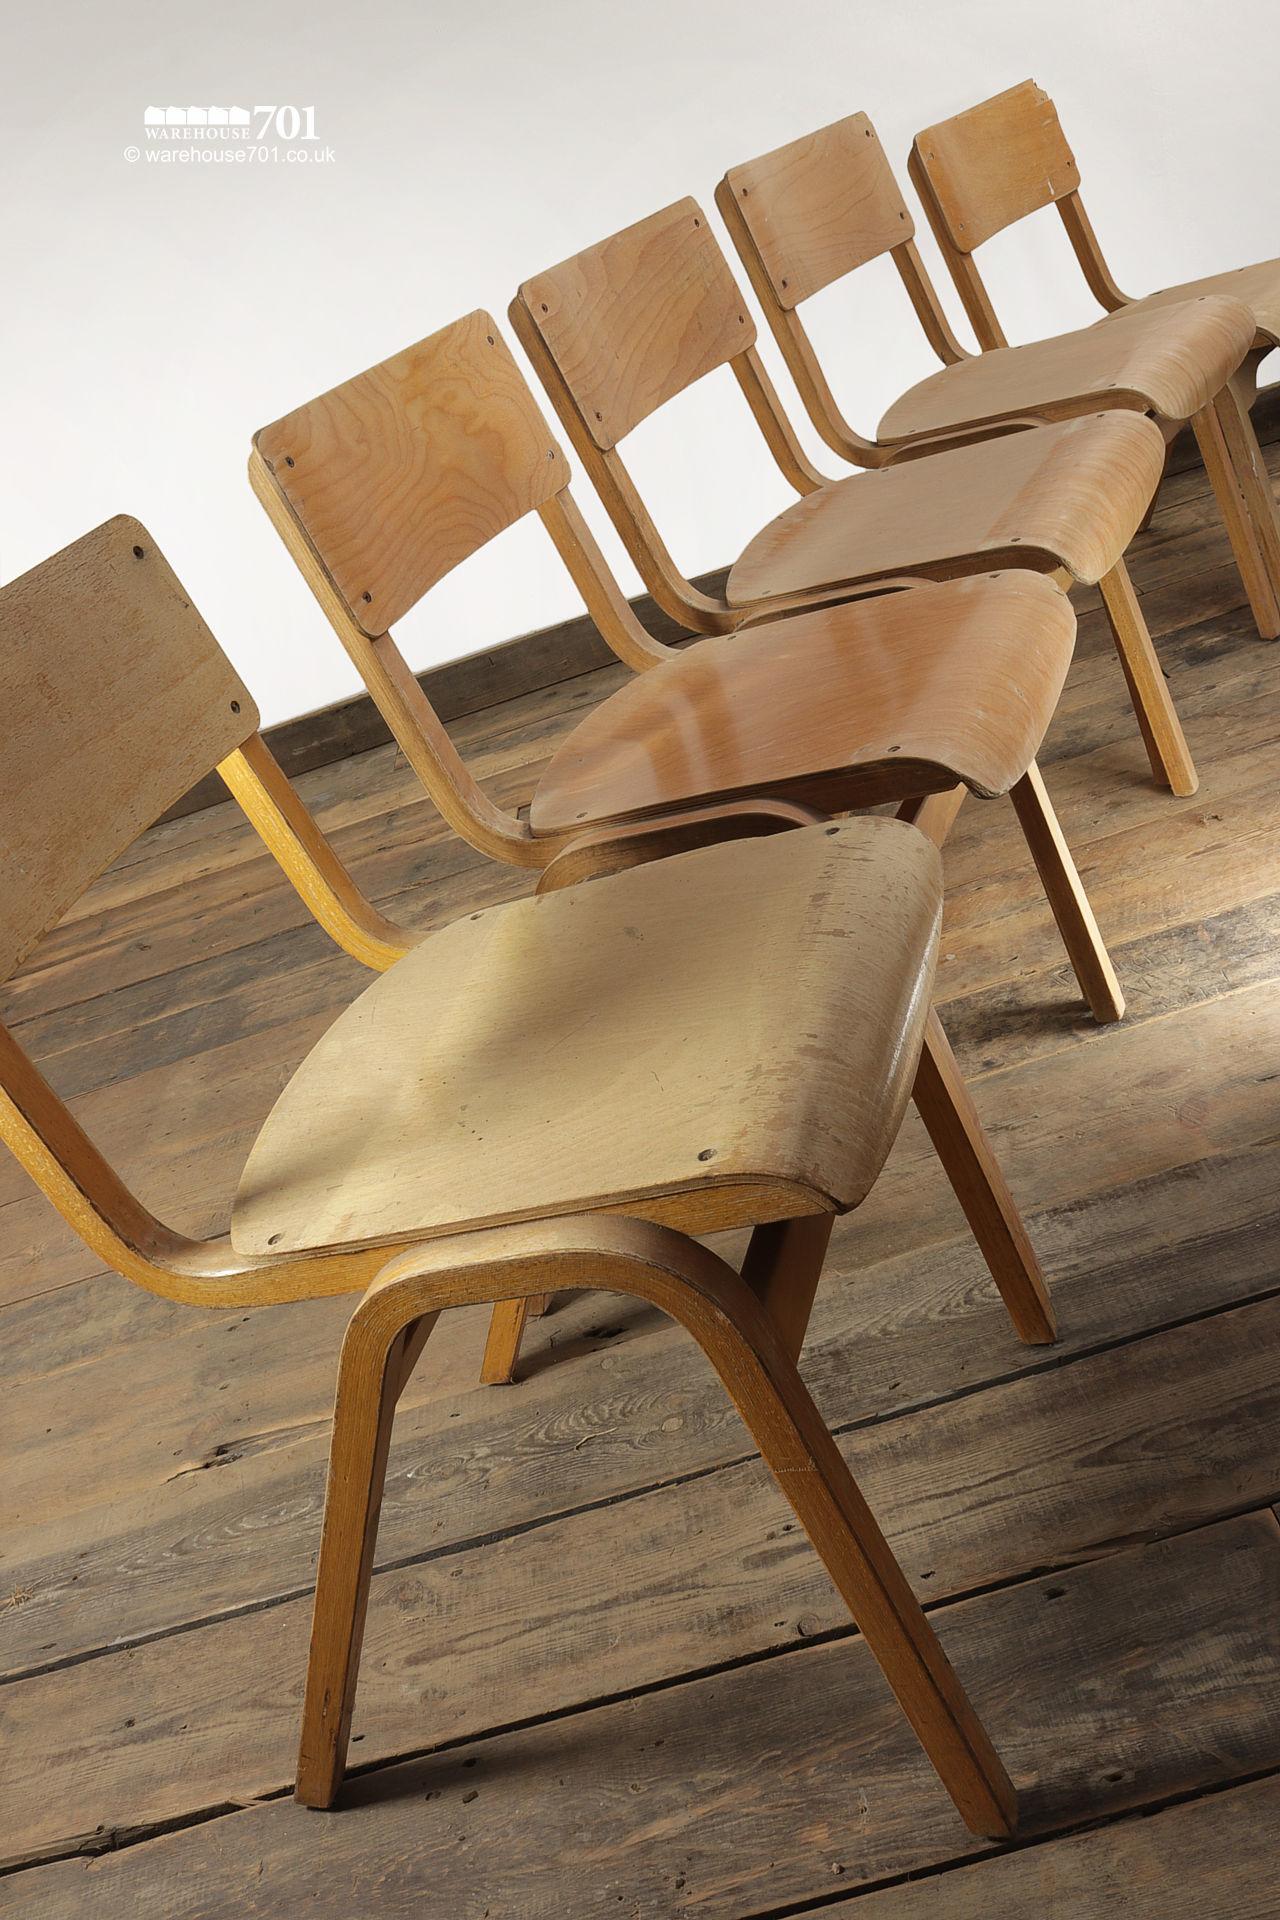 Used Vintage Shaped Wood and Ply Stacking Chairs